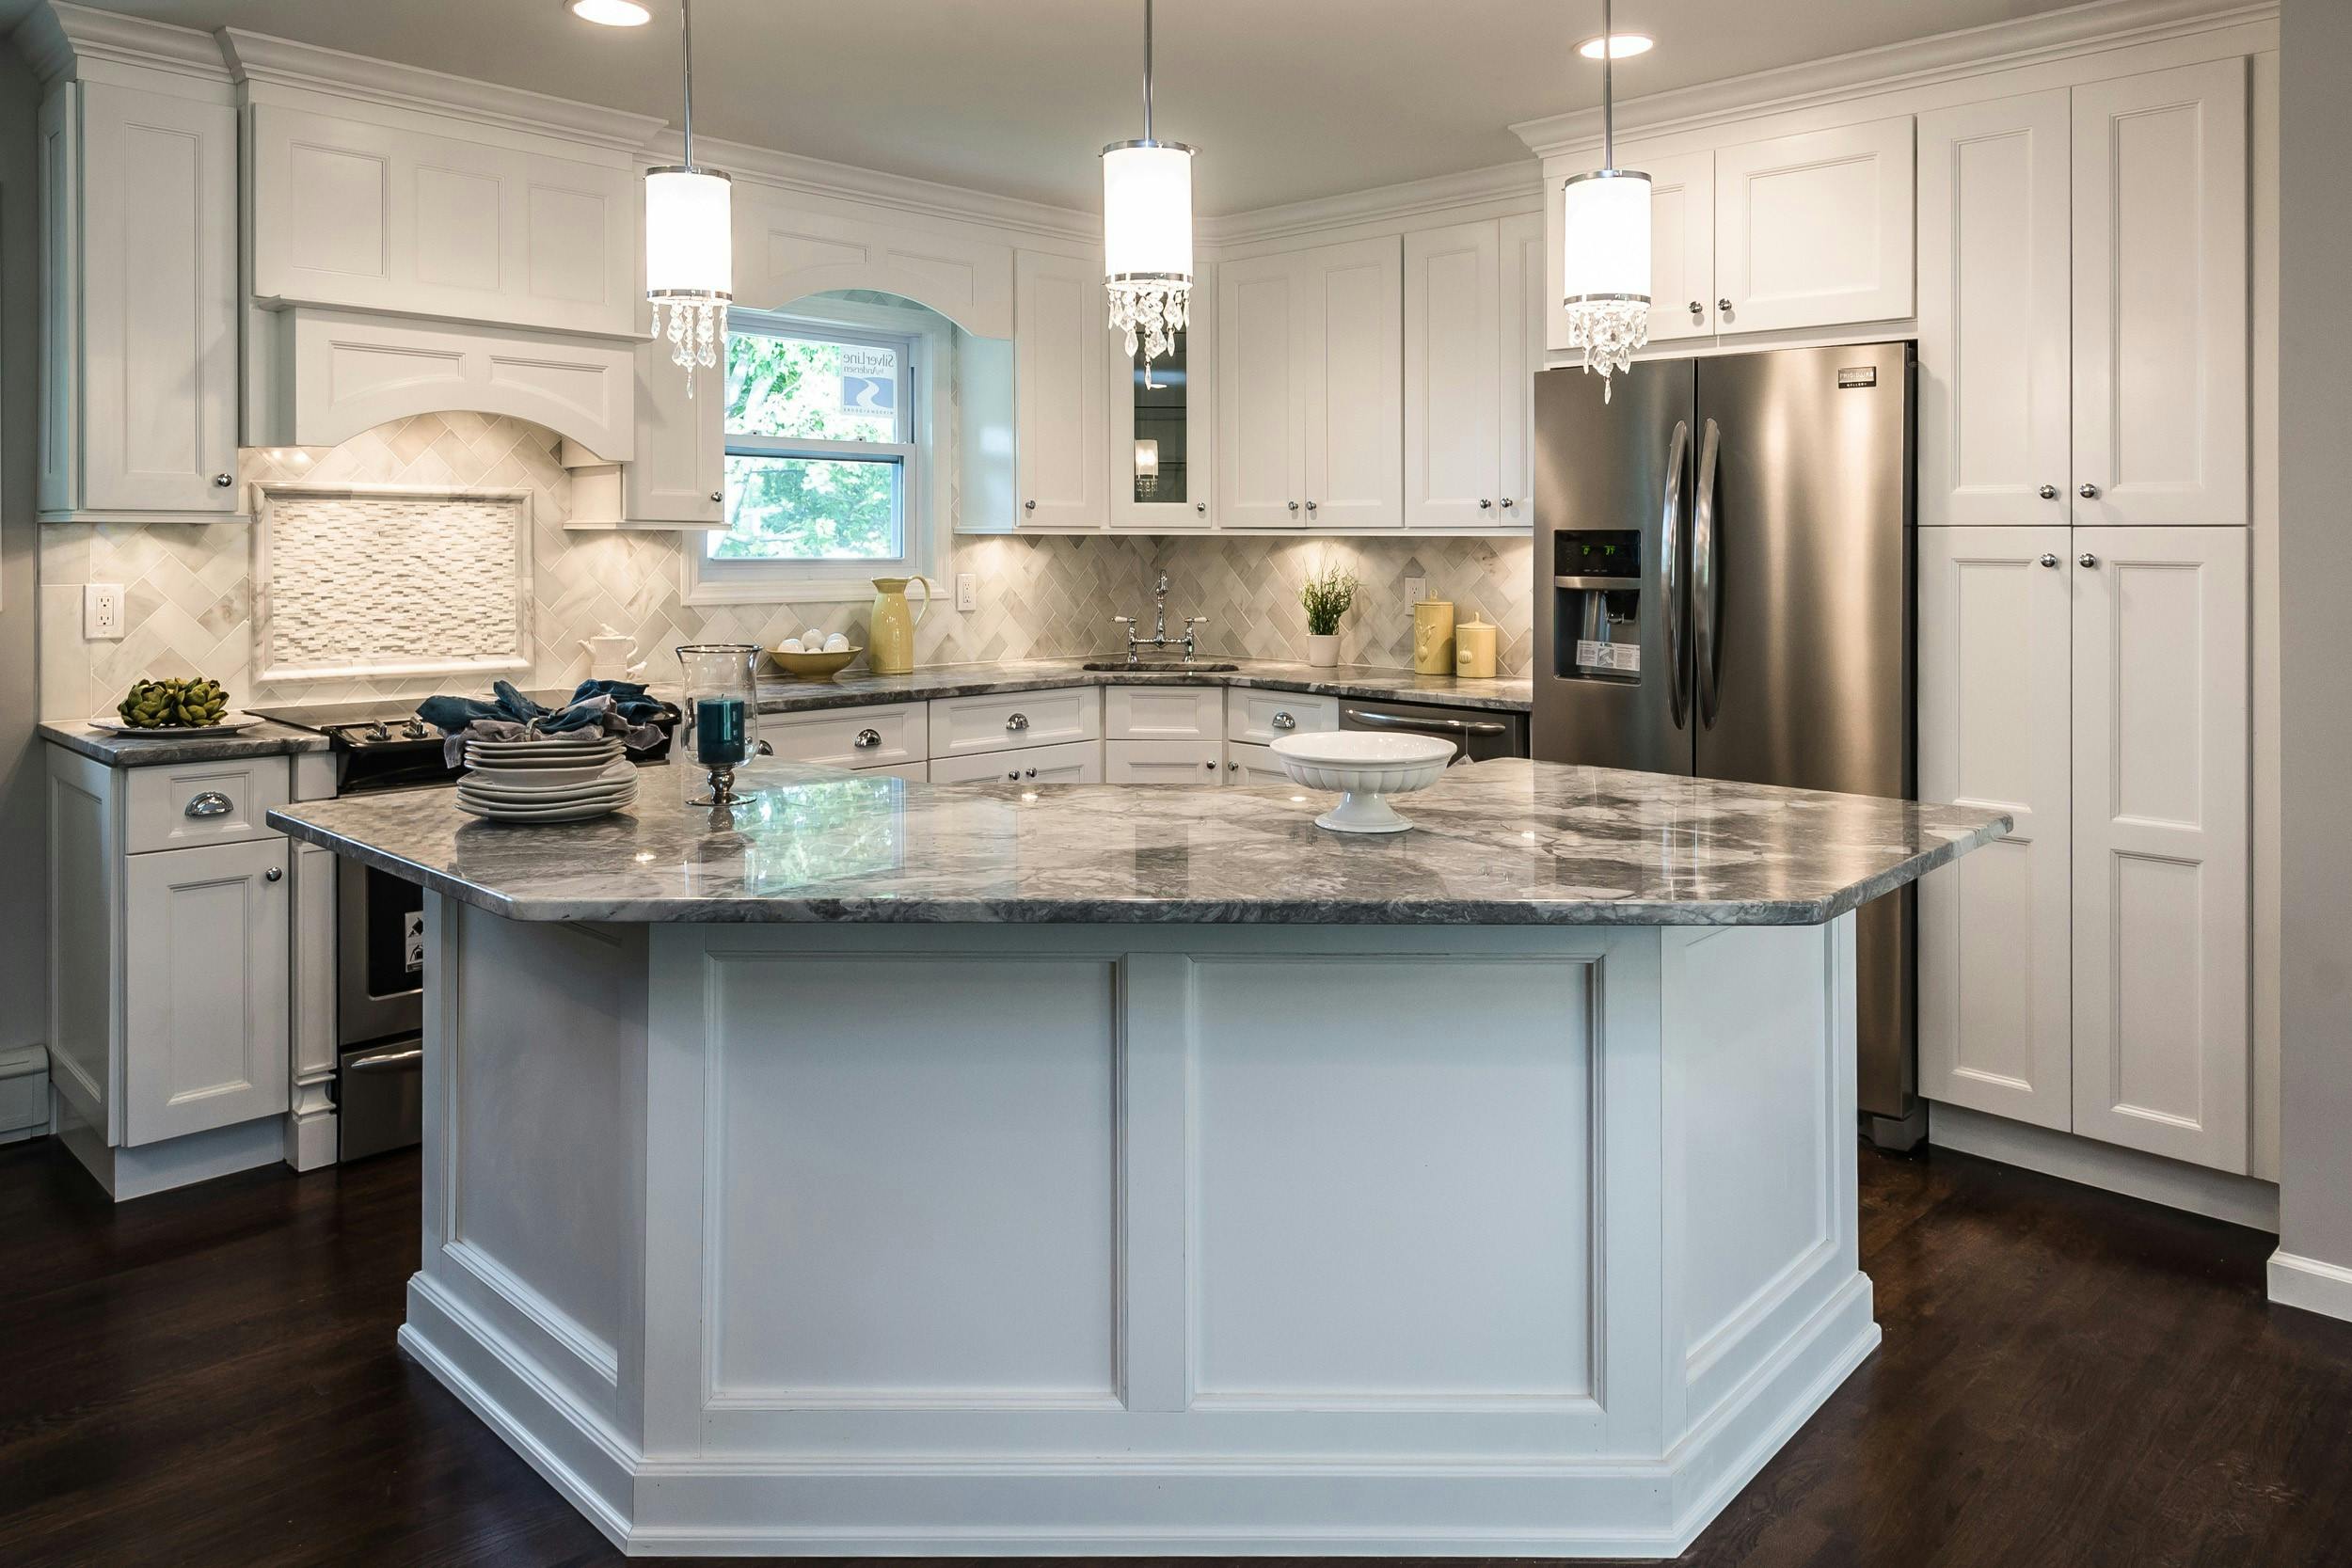 Kitchen Countertops And Cabinets, What Color Cabinets Go With Black Granite Countertops